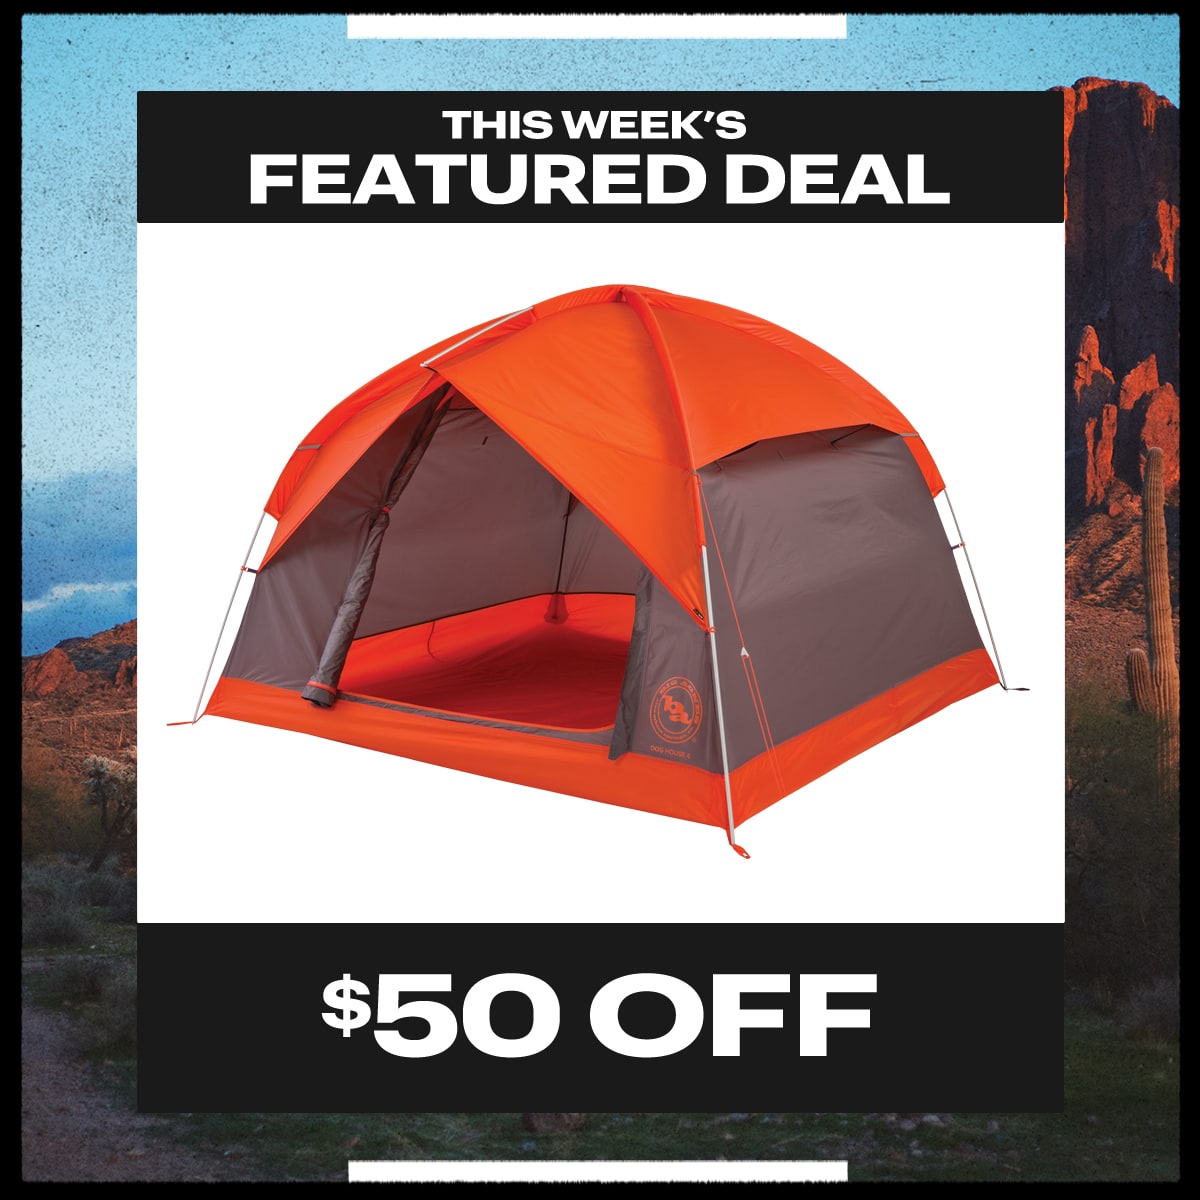 This week's featured deal. $50 off.